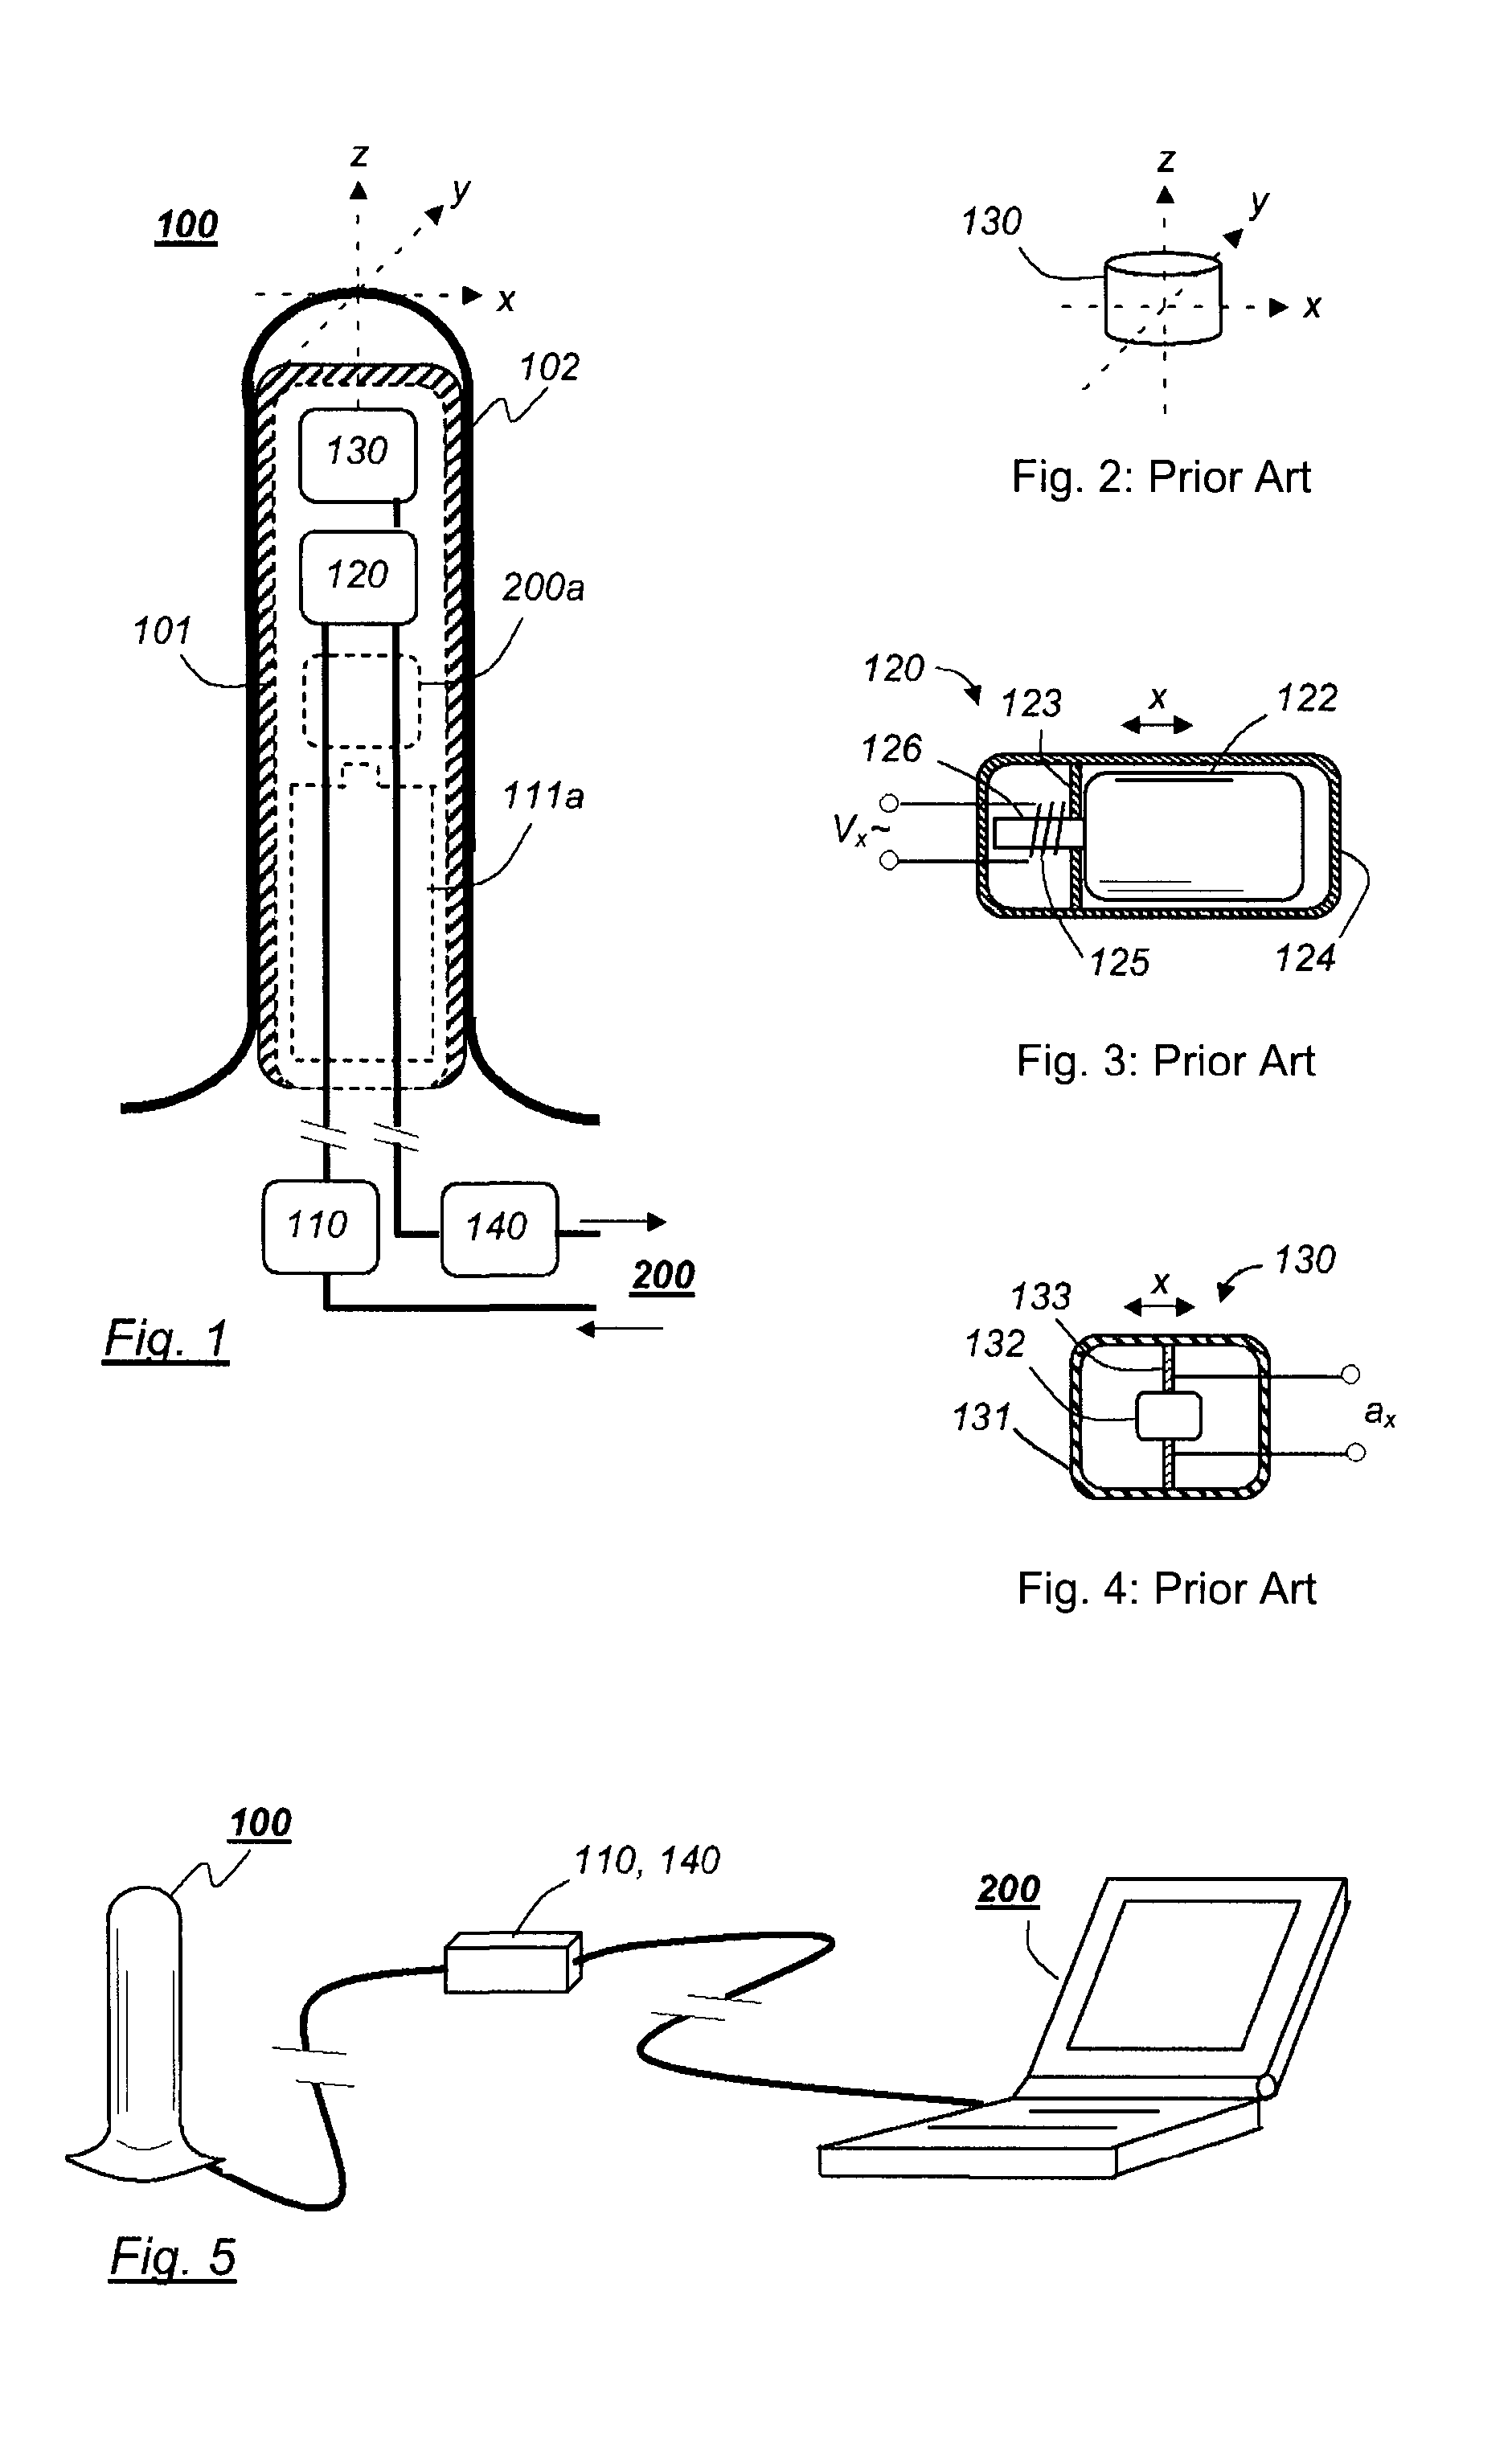 Apparatus, system, and method for testing and exercising the pelvic floor musculature